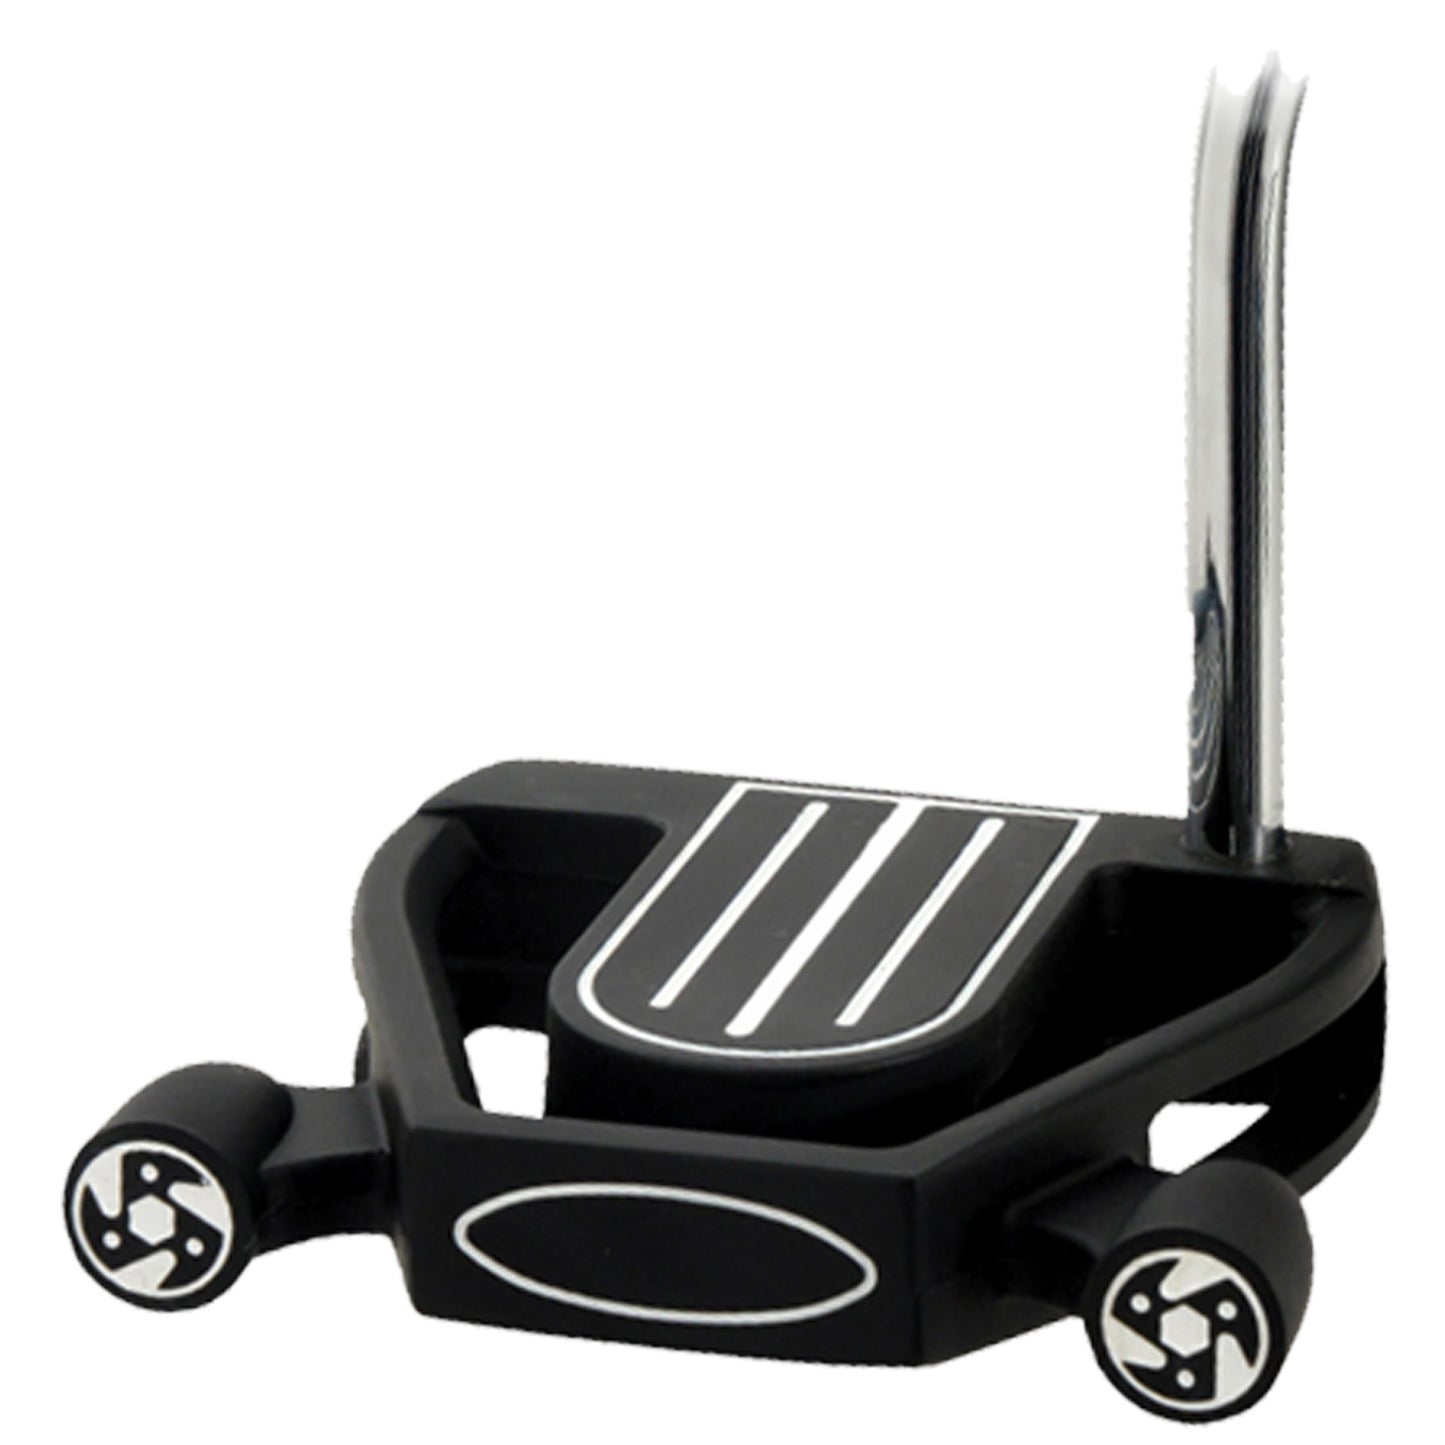 Left Handed Ben Sayers Mens XF Putters